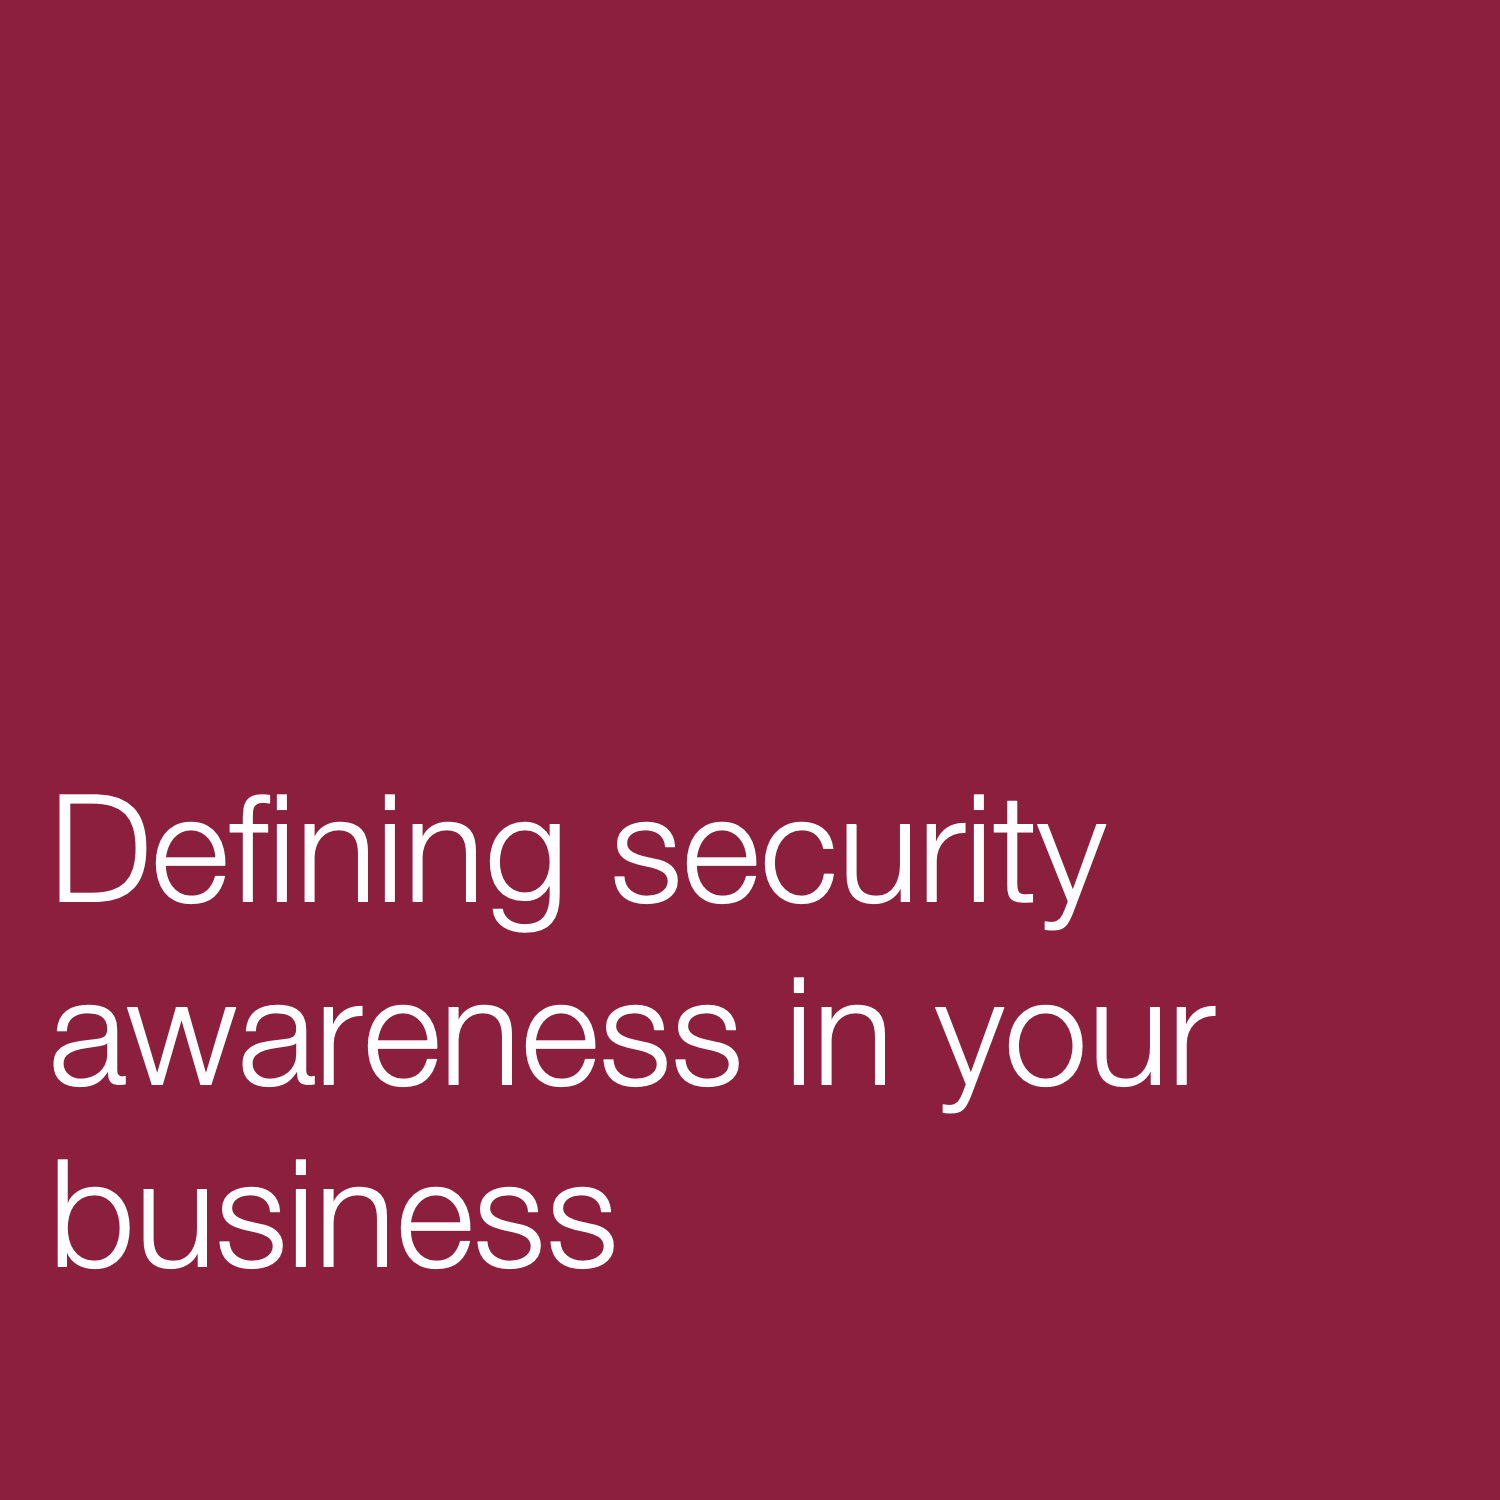 Defining security awareness in your business